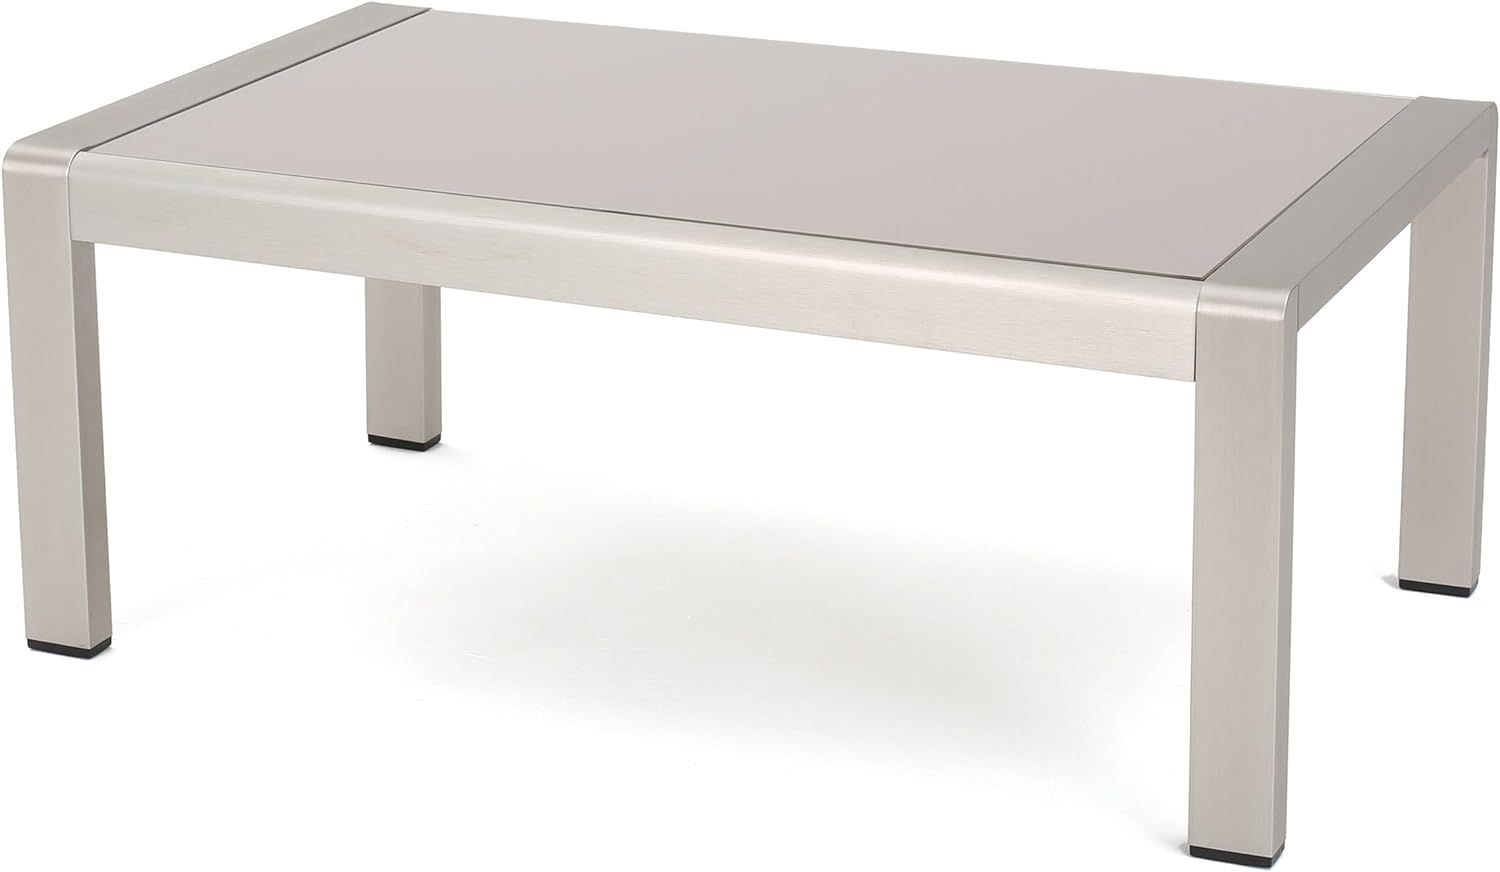 Christopher Knight Home Cape Coral Outdoor Aluminum Coffee Table with Glass Top, Silver | Amazon (US)